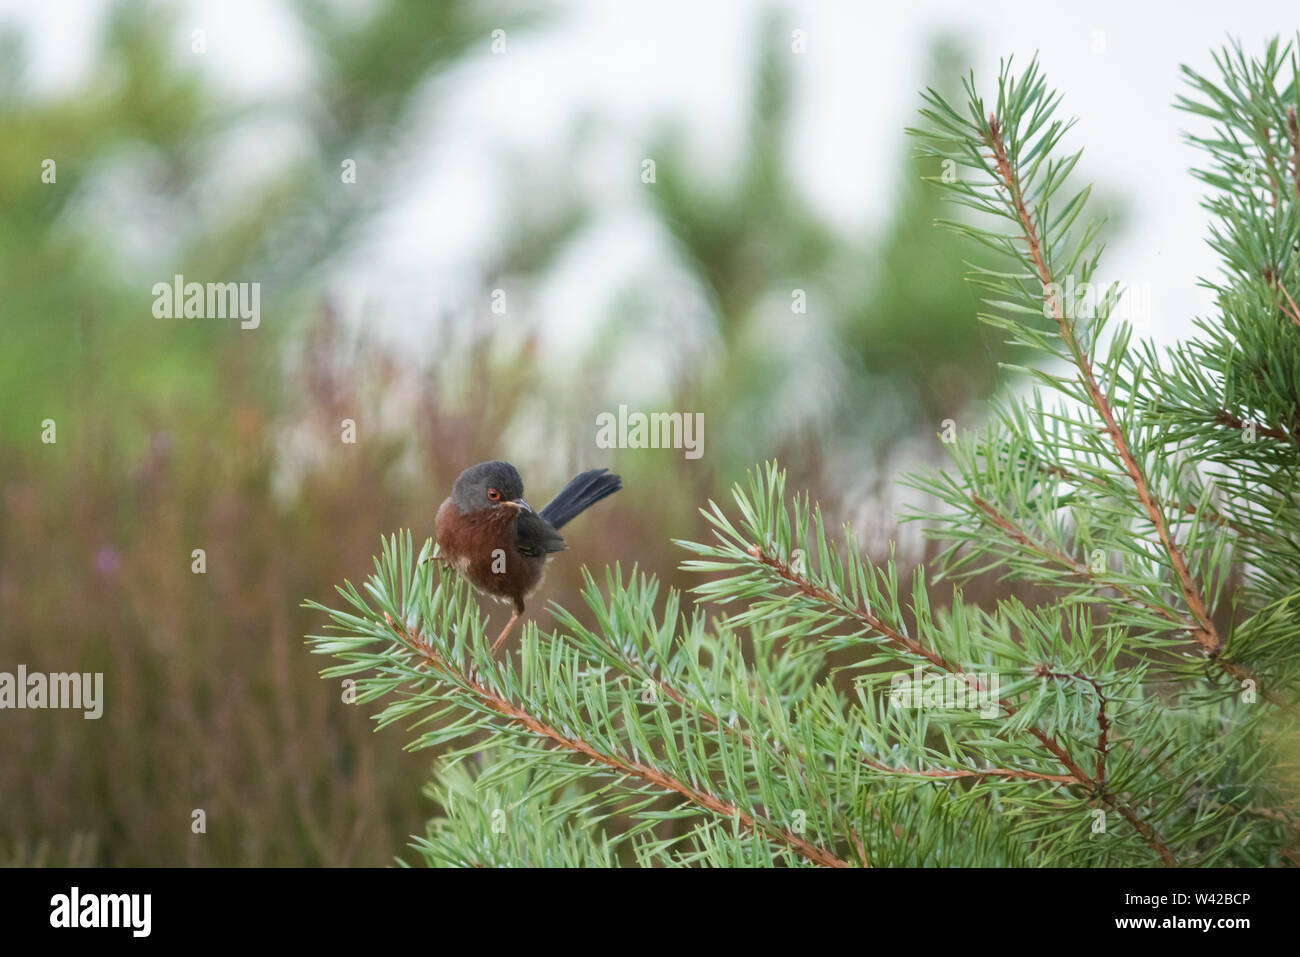 Dartford warbler perched on young pine shoots Stock Photo